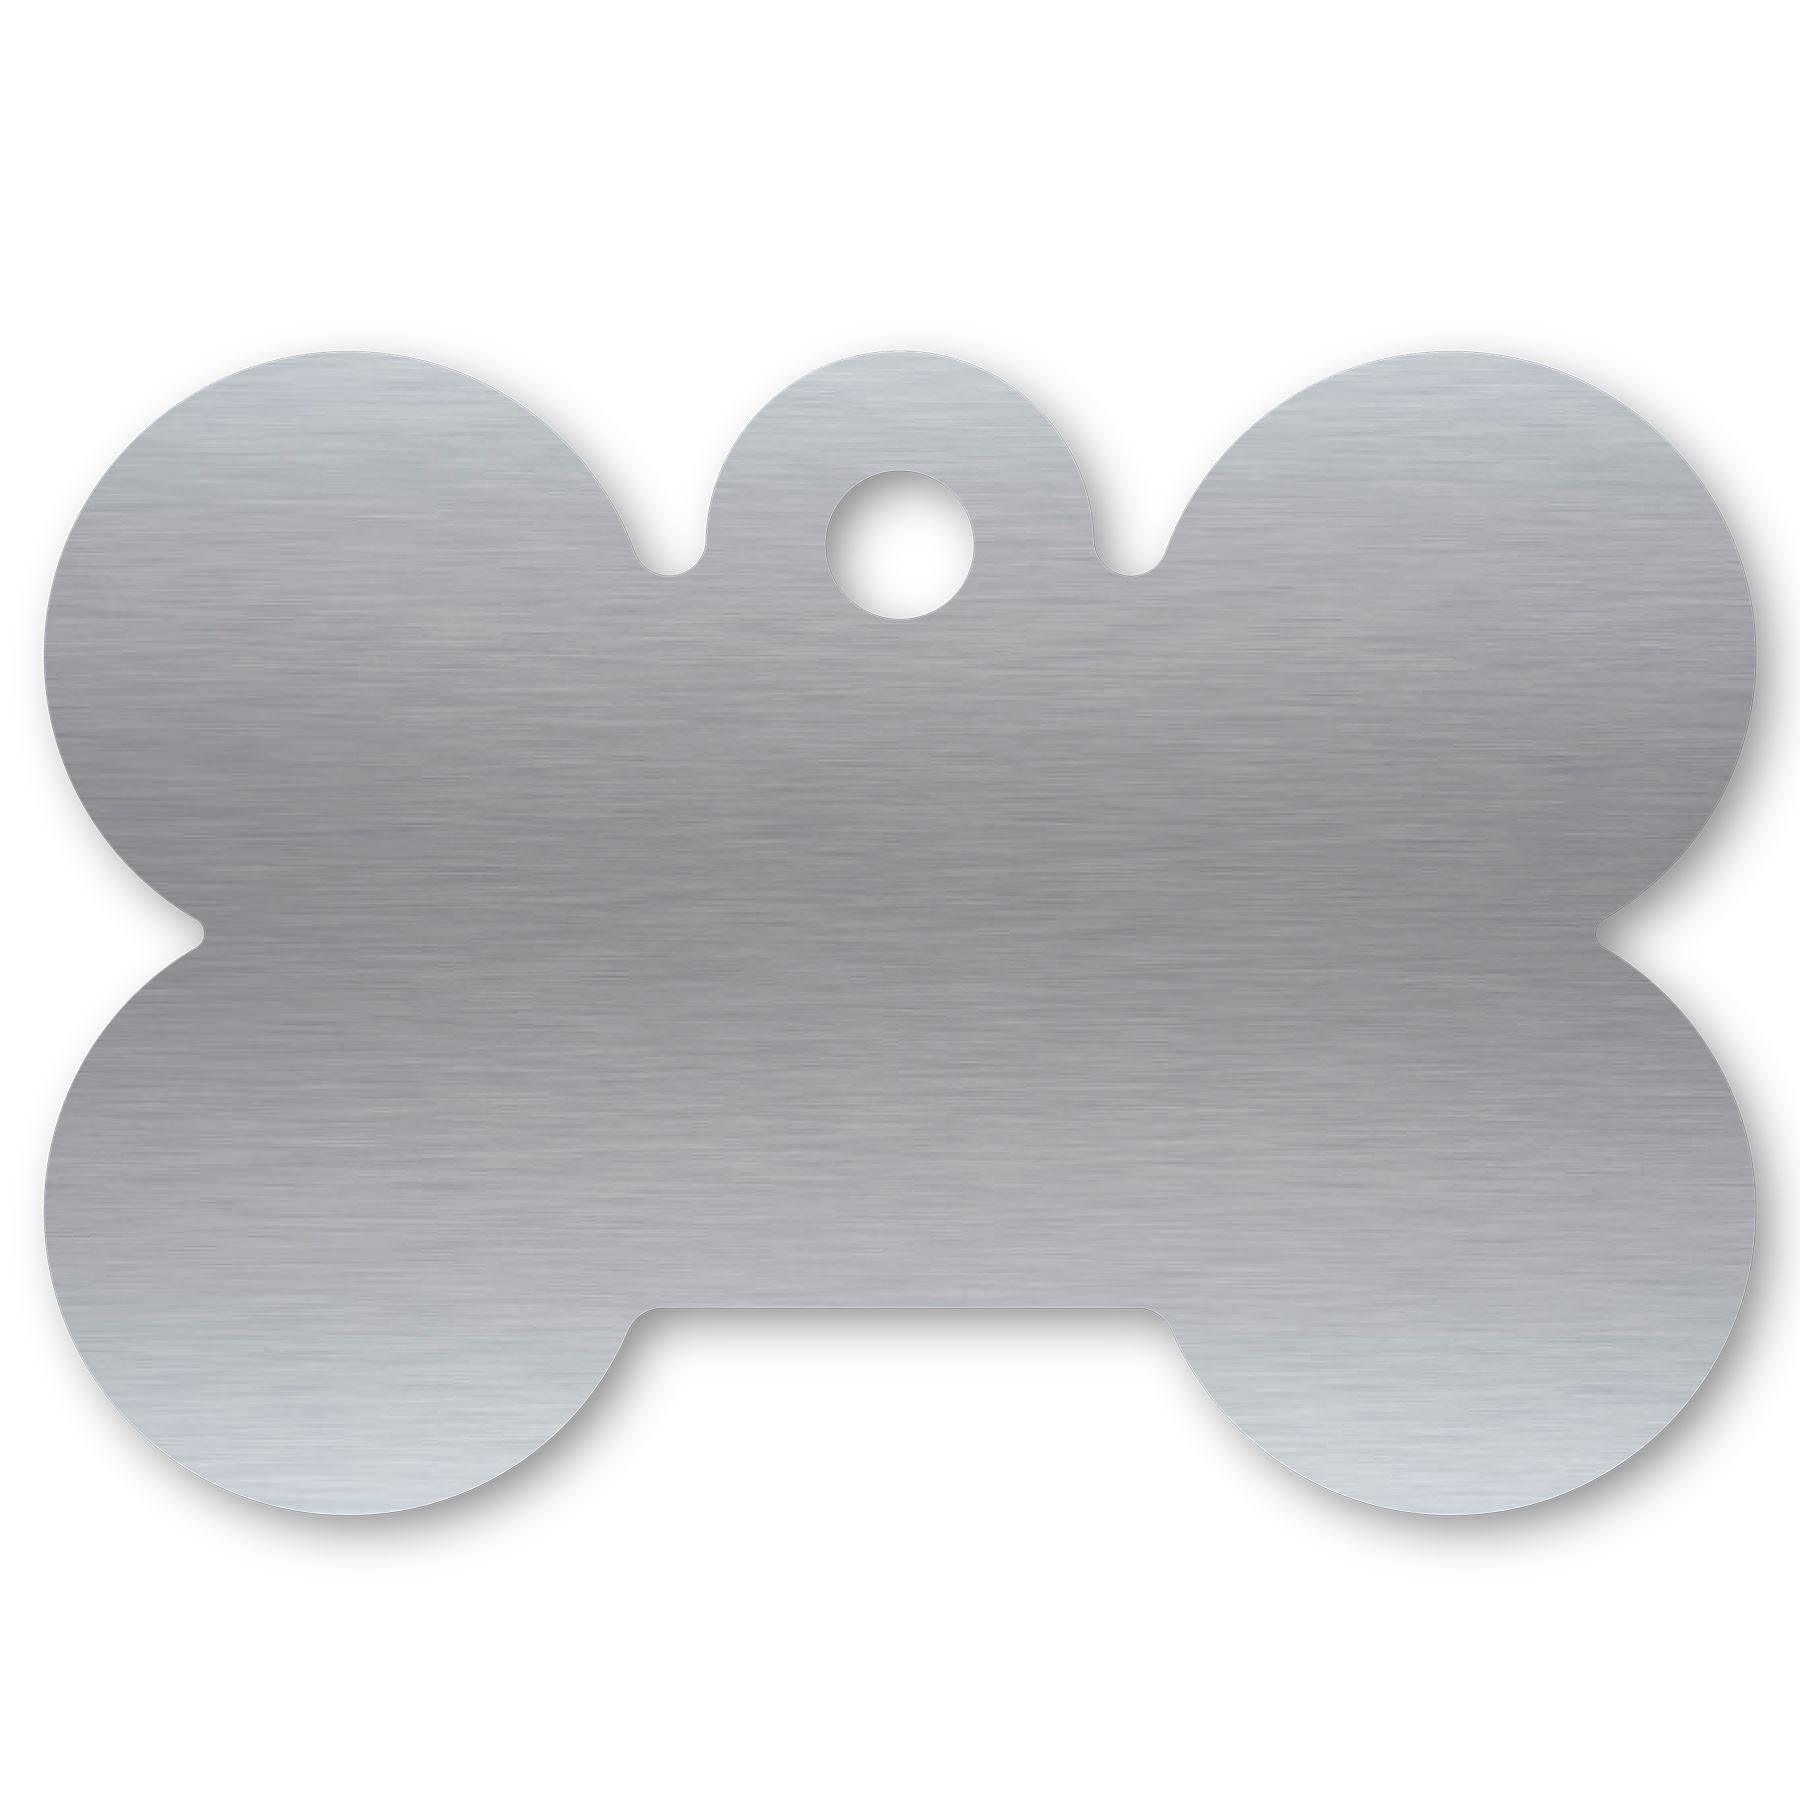 Anodized Aluminum Dog Bone Shaped Tags, 3/4" x 1-1/16" with 3/32" Hole, Laser Engraved Metal Tags Craftworks NW Silver 